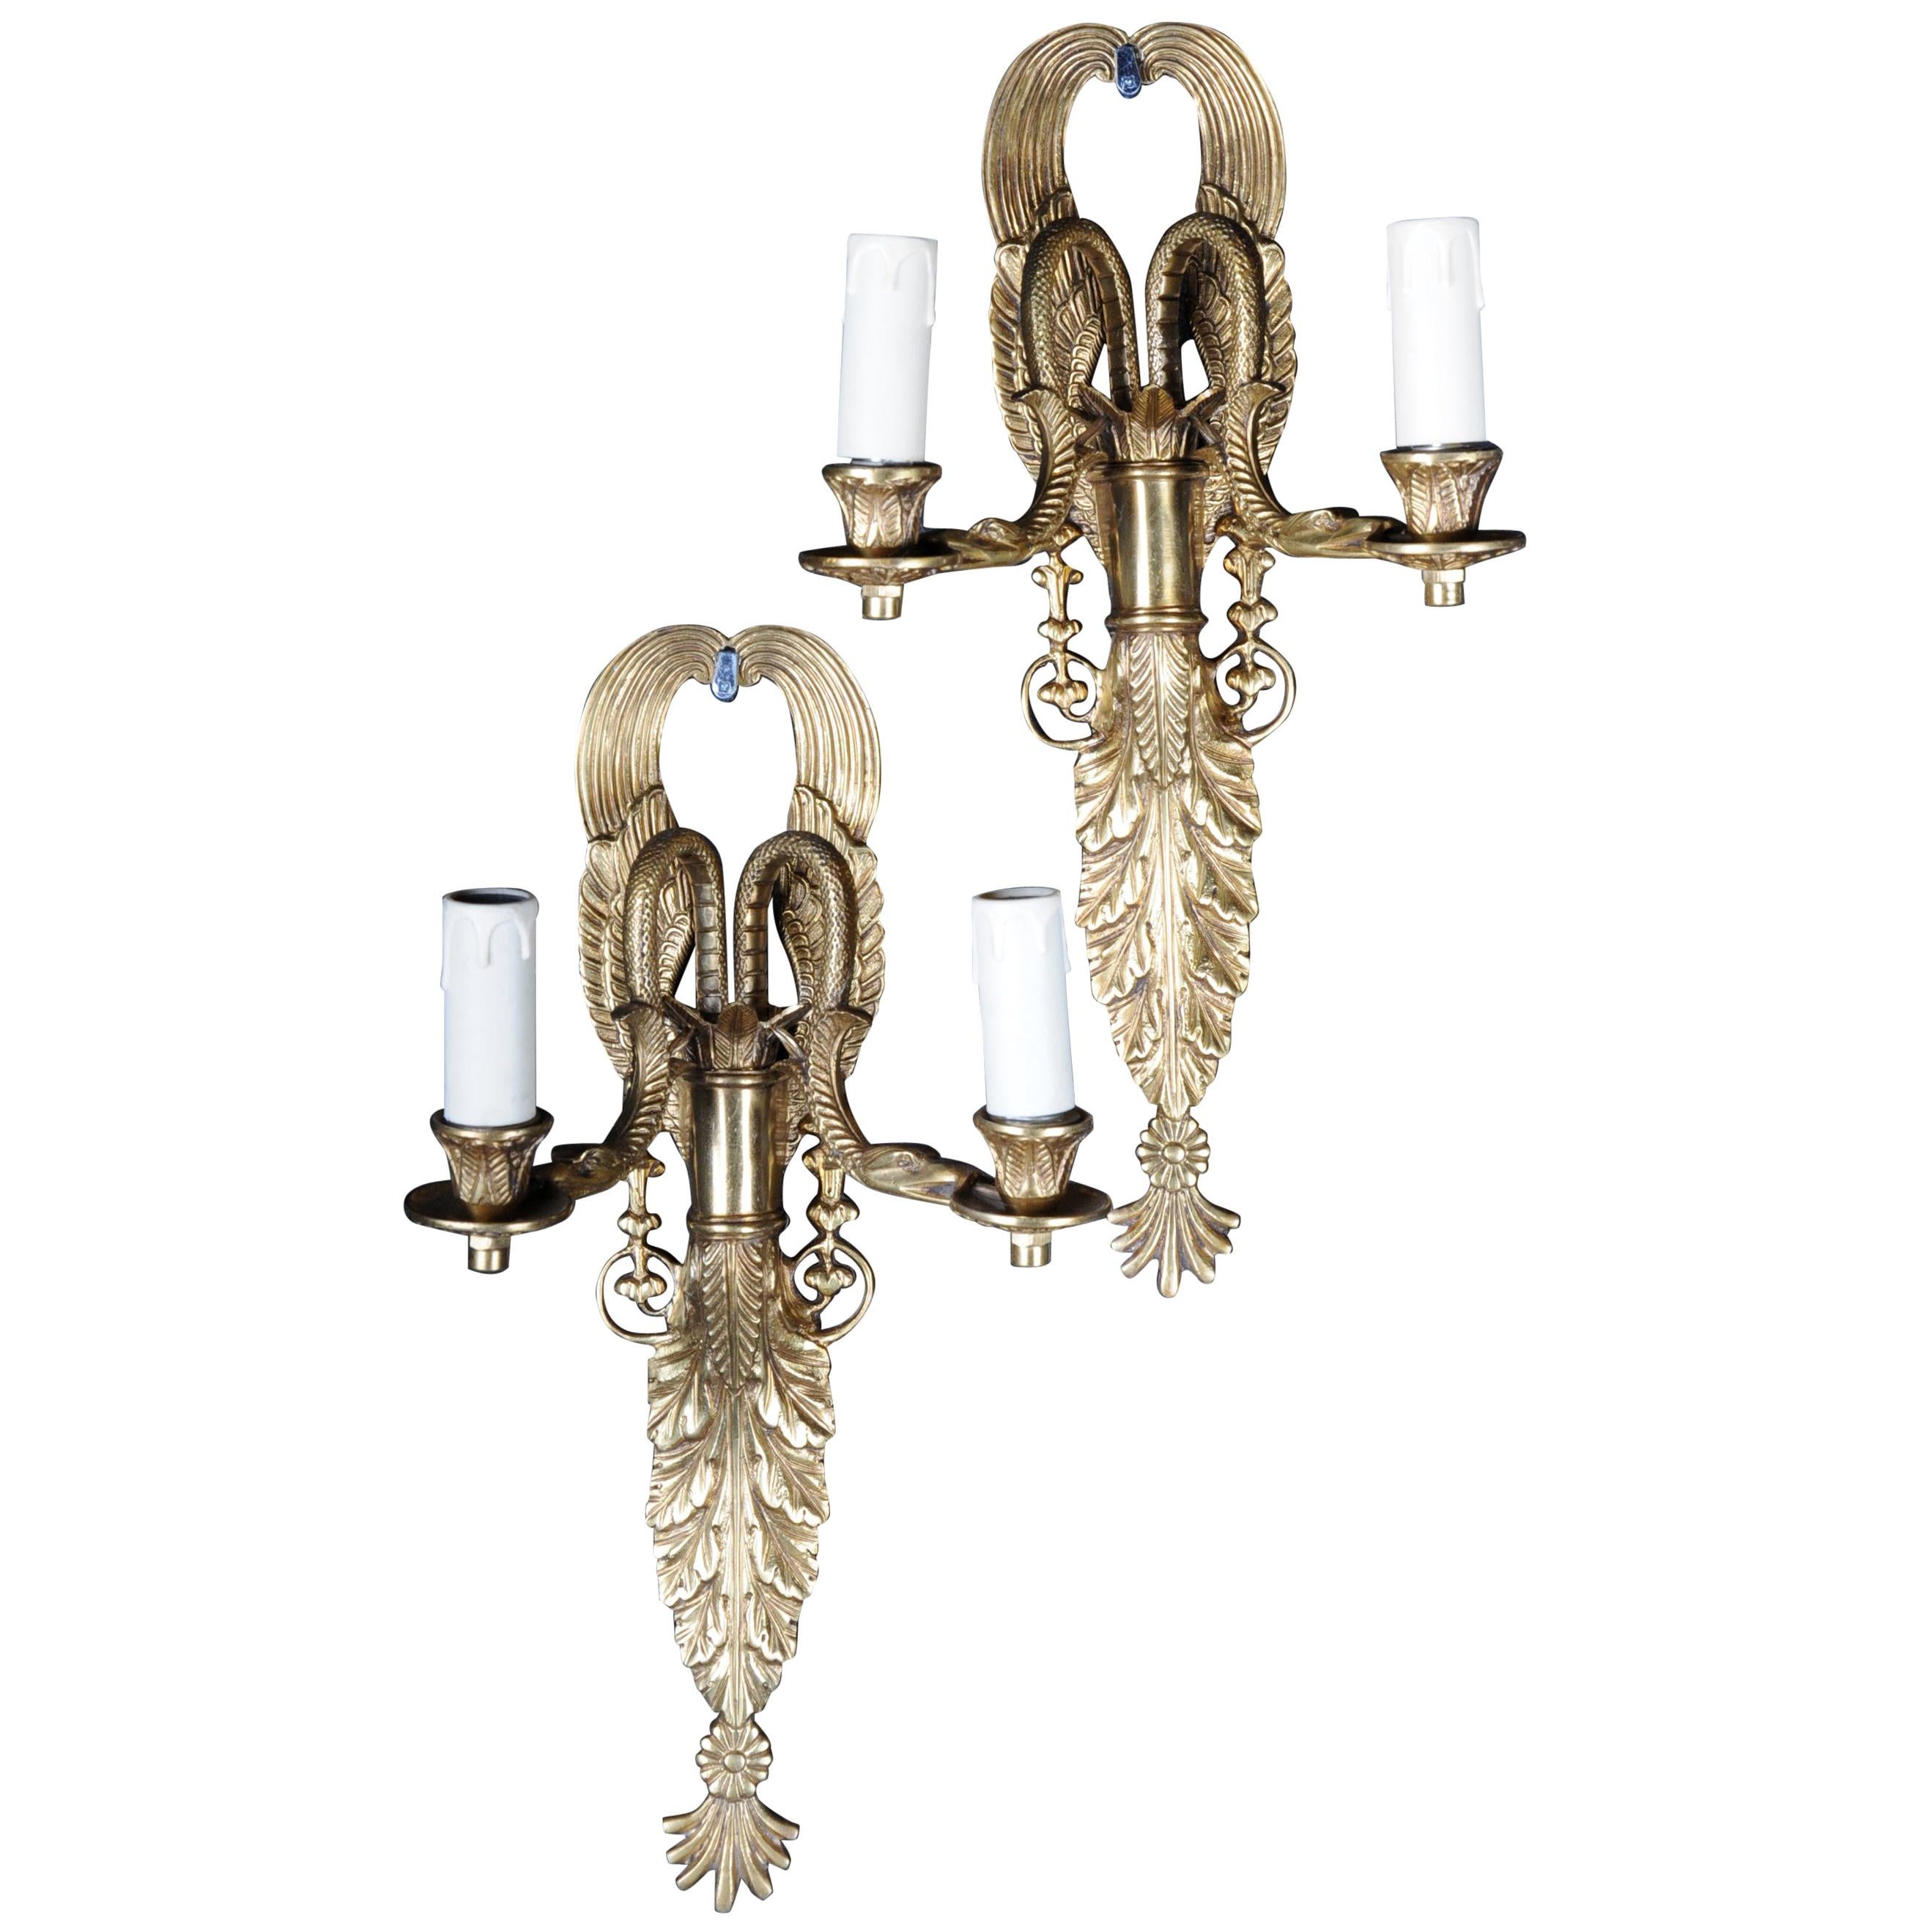 Pair of French Bronze Wall Appliqués or Sconces Empire Style